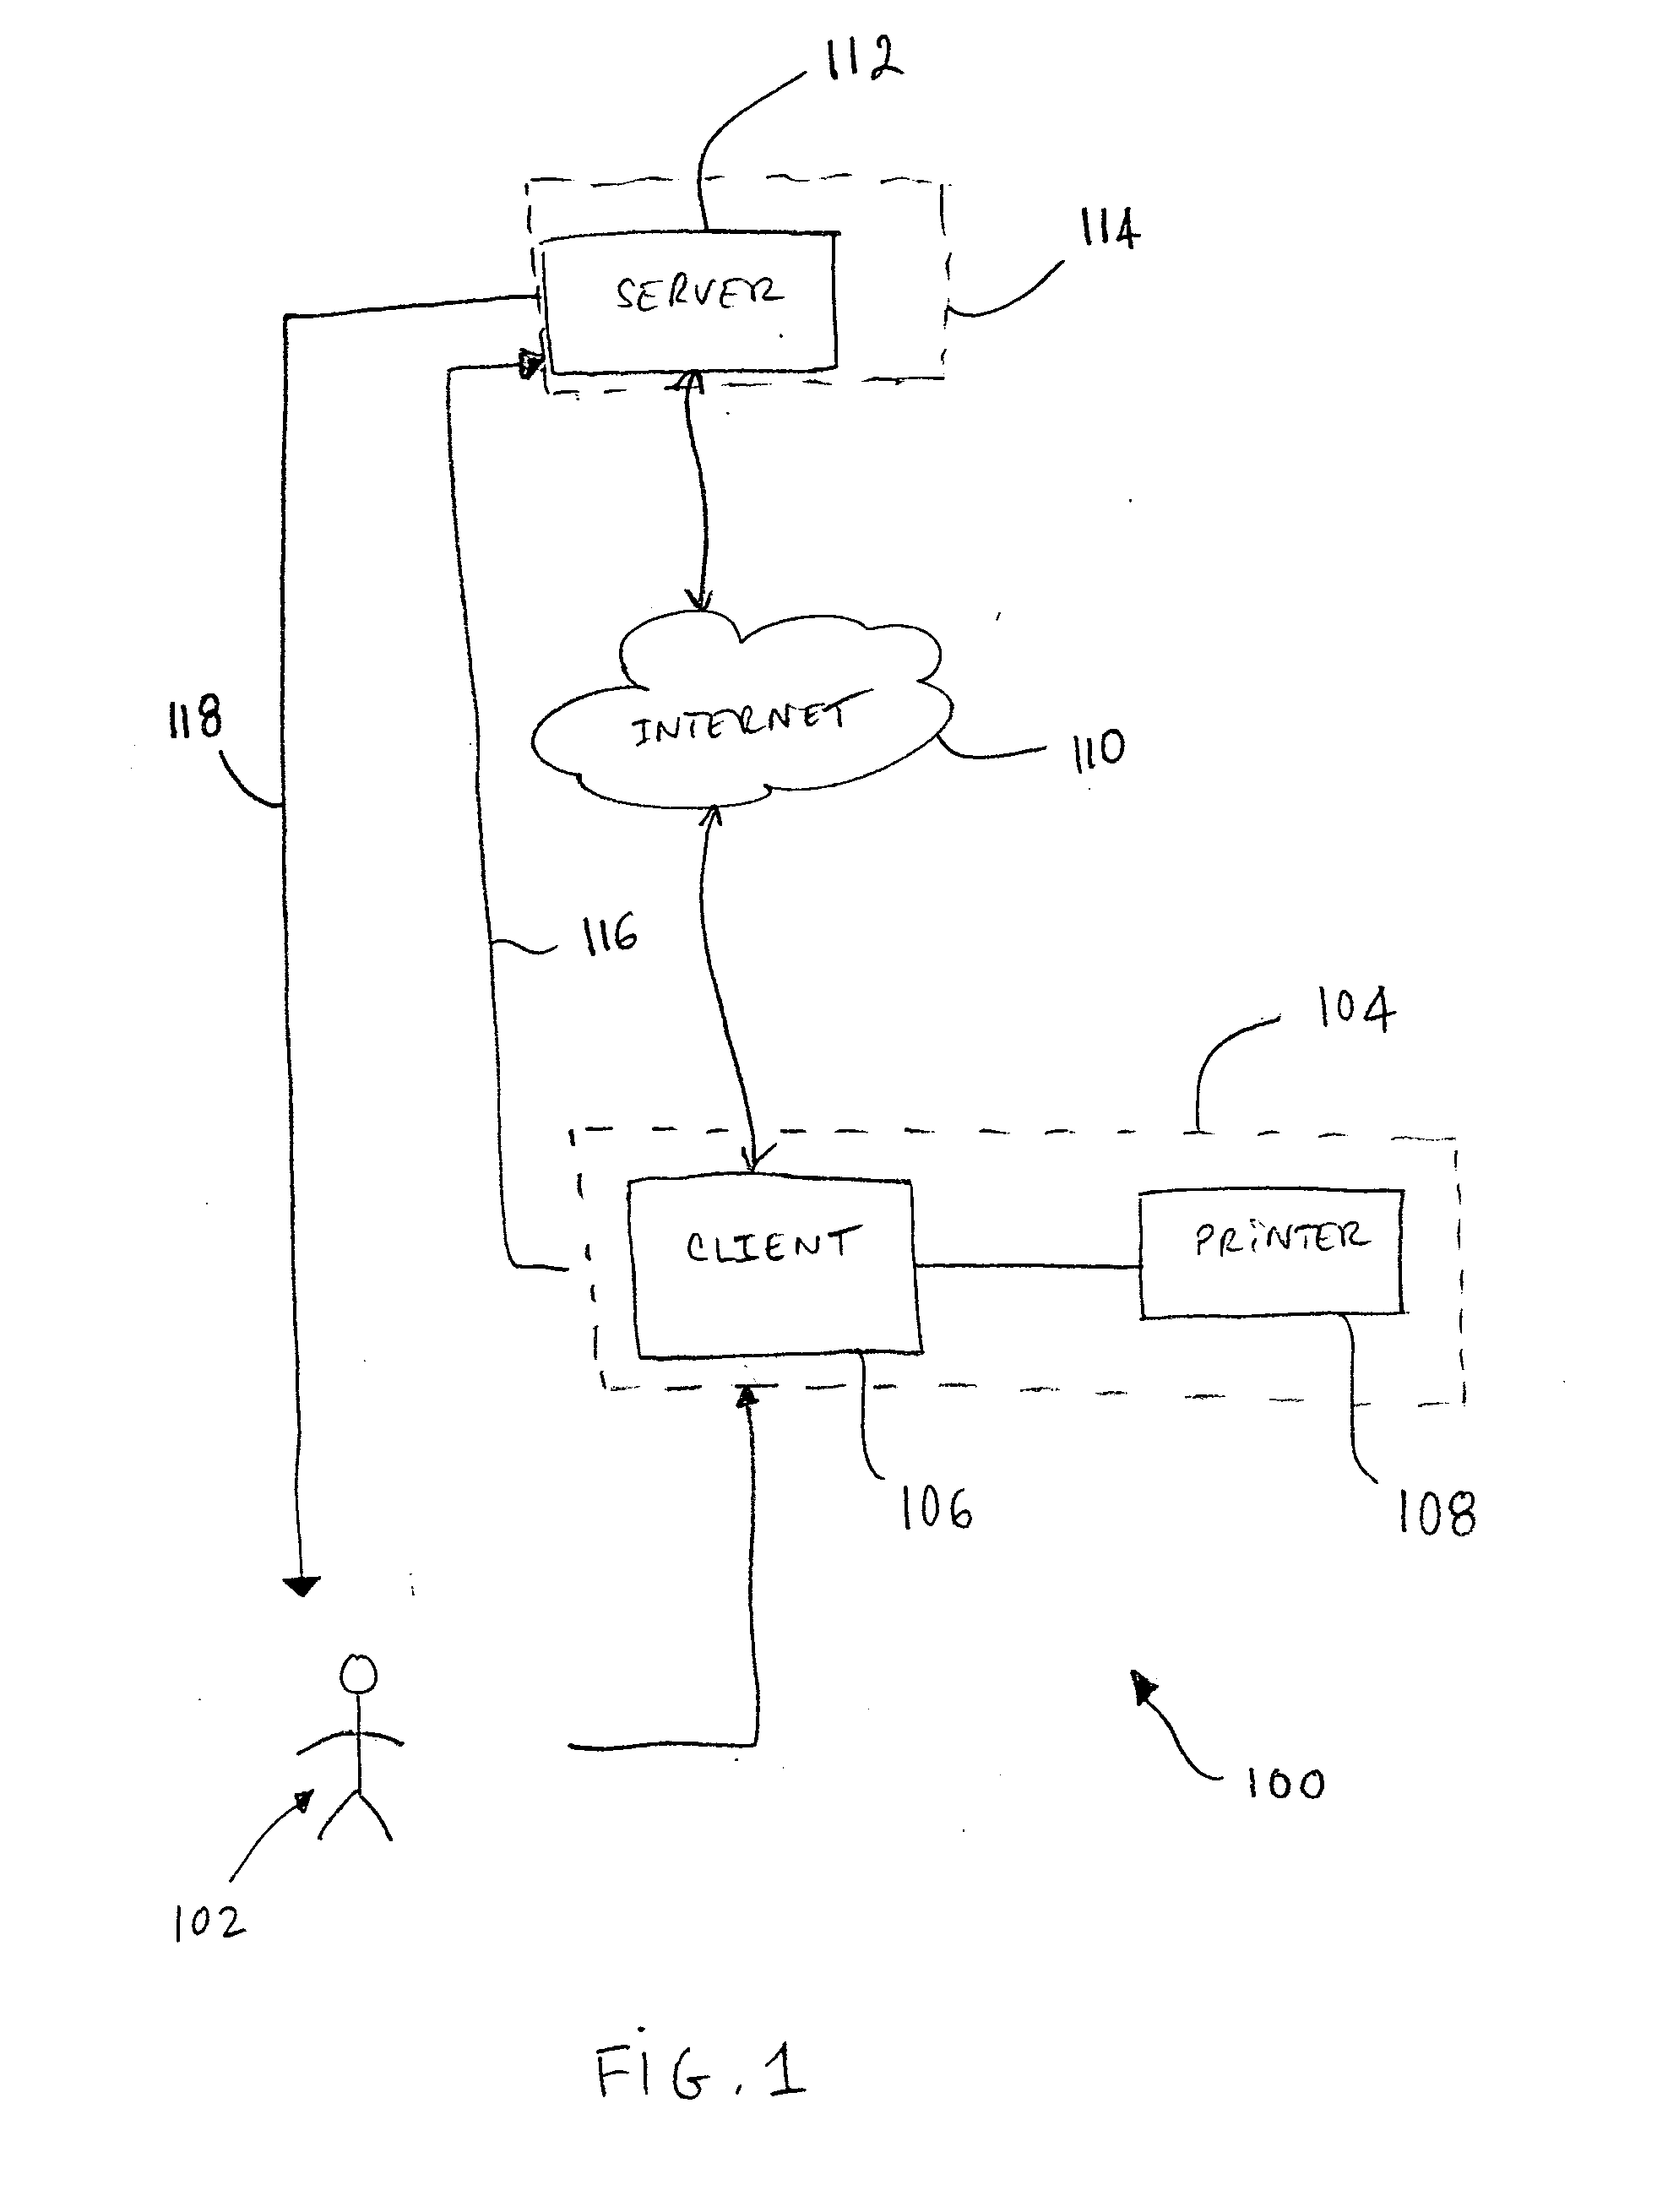 System, method, and apparatus for evaluating a person's athletic ability